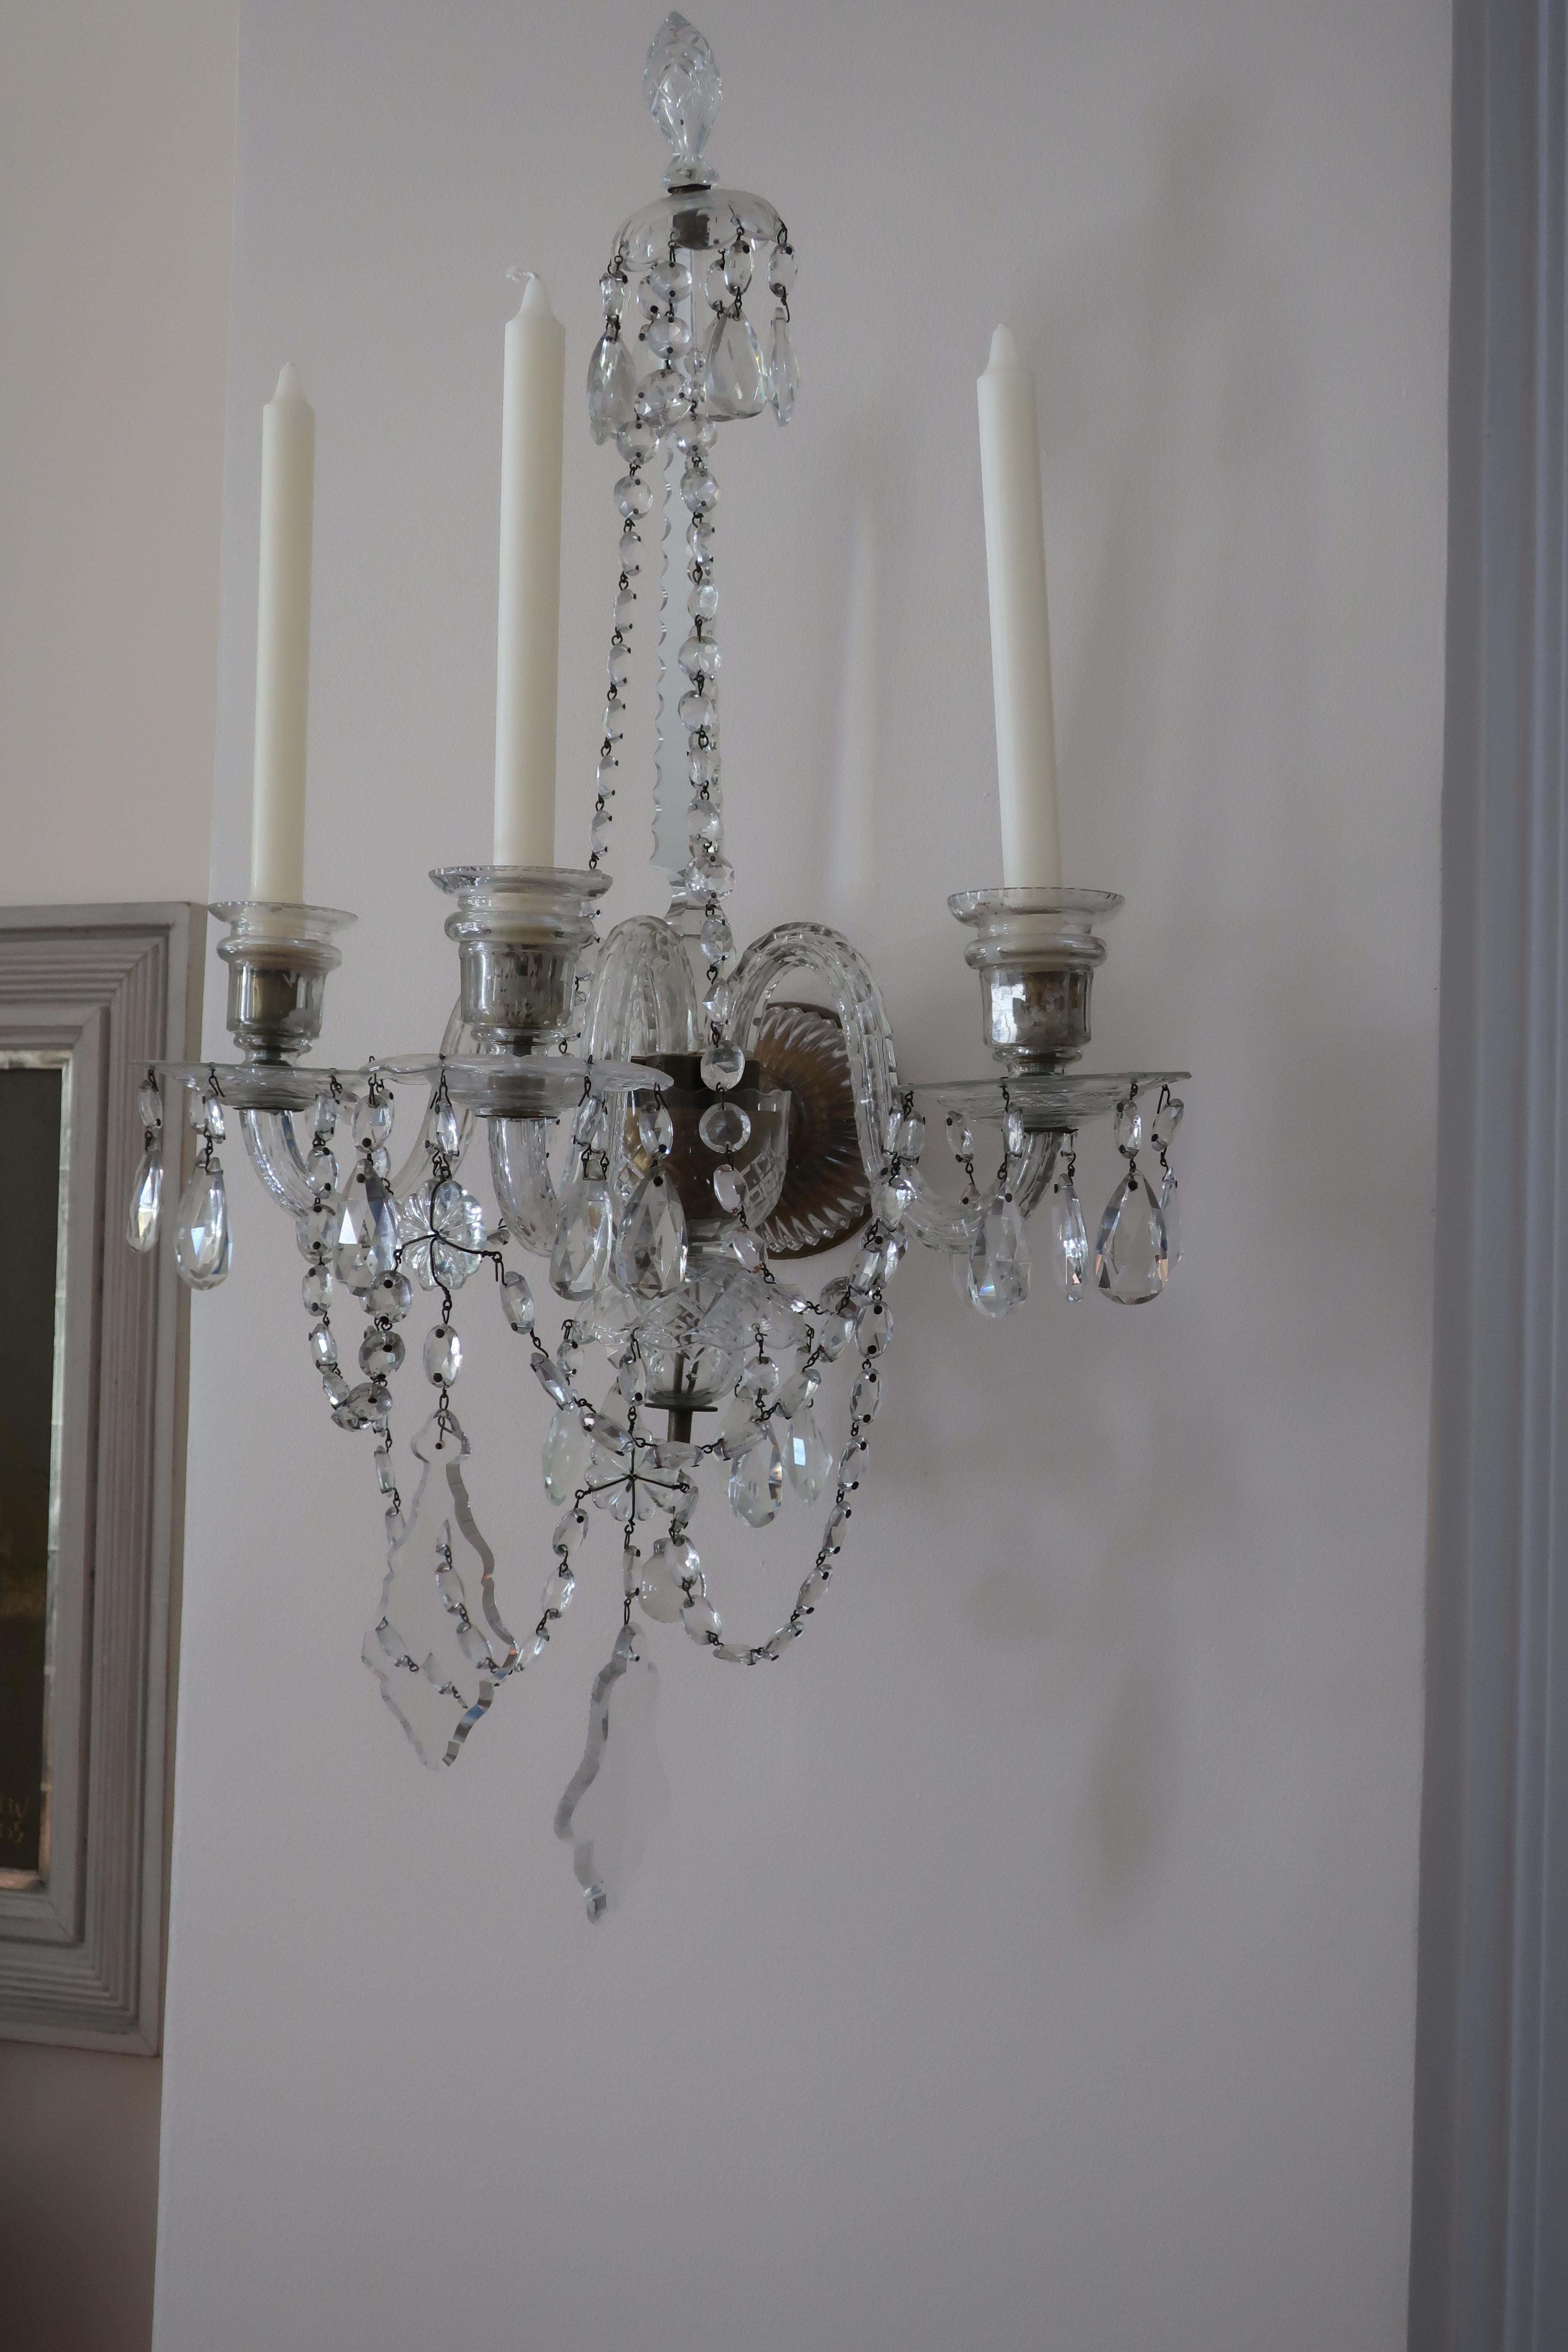 Pair of baccarat style three-arm crystal wall sconces
A stunning and large scale pair of French 19th century Louis XVI style Baccarat cut-lead crystal three-arm sconces. Each sconce is topped by a beautiful glass obelisk mirrored spire. The three